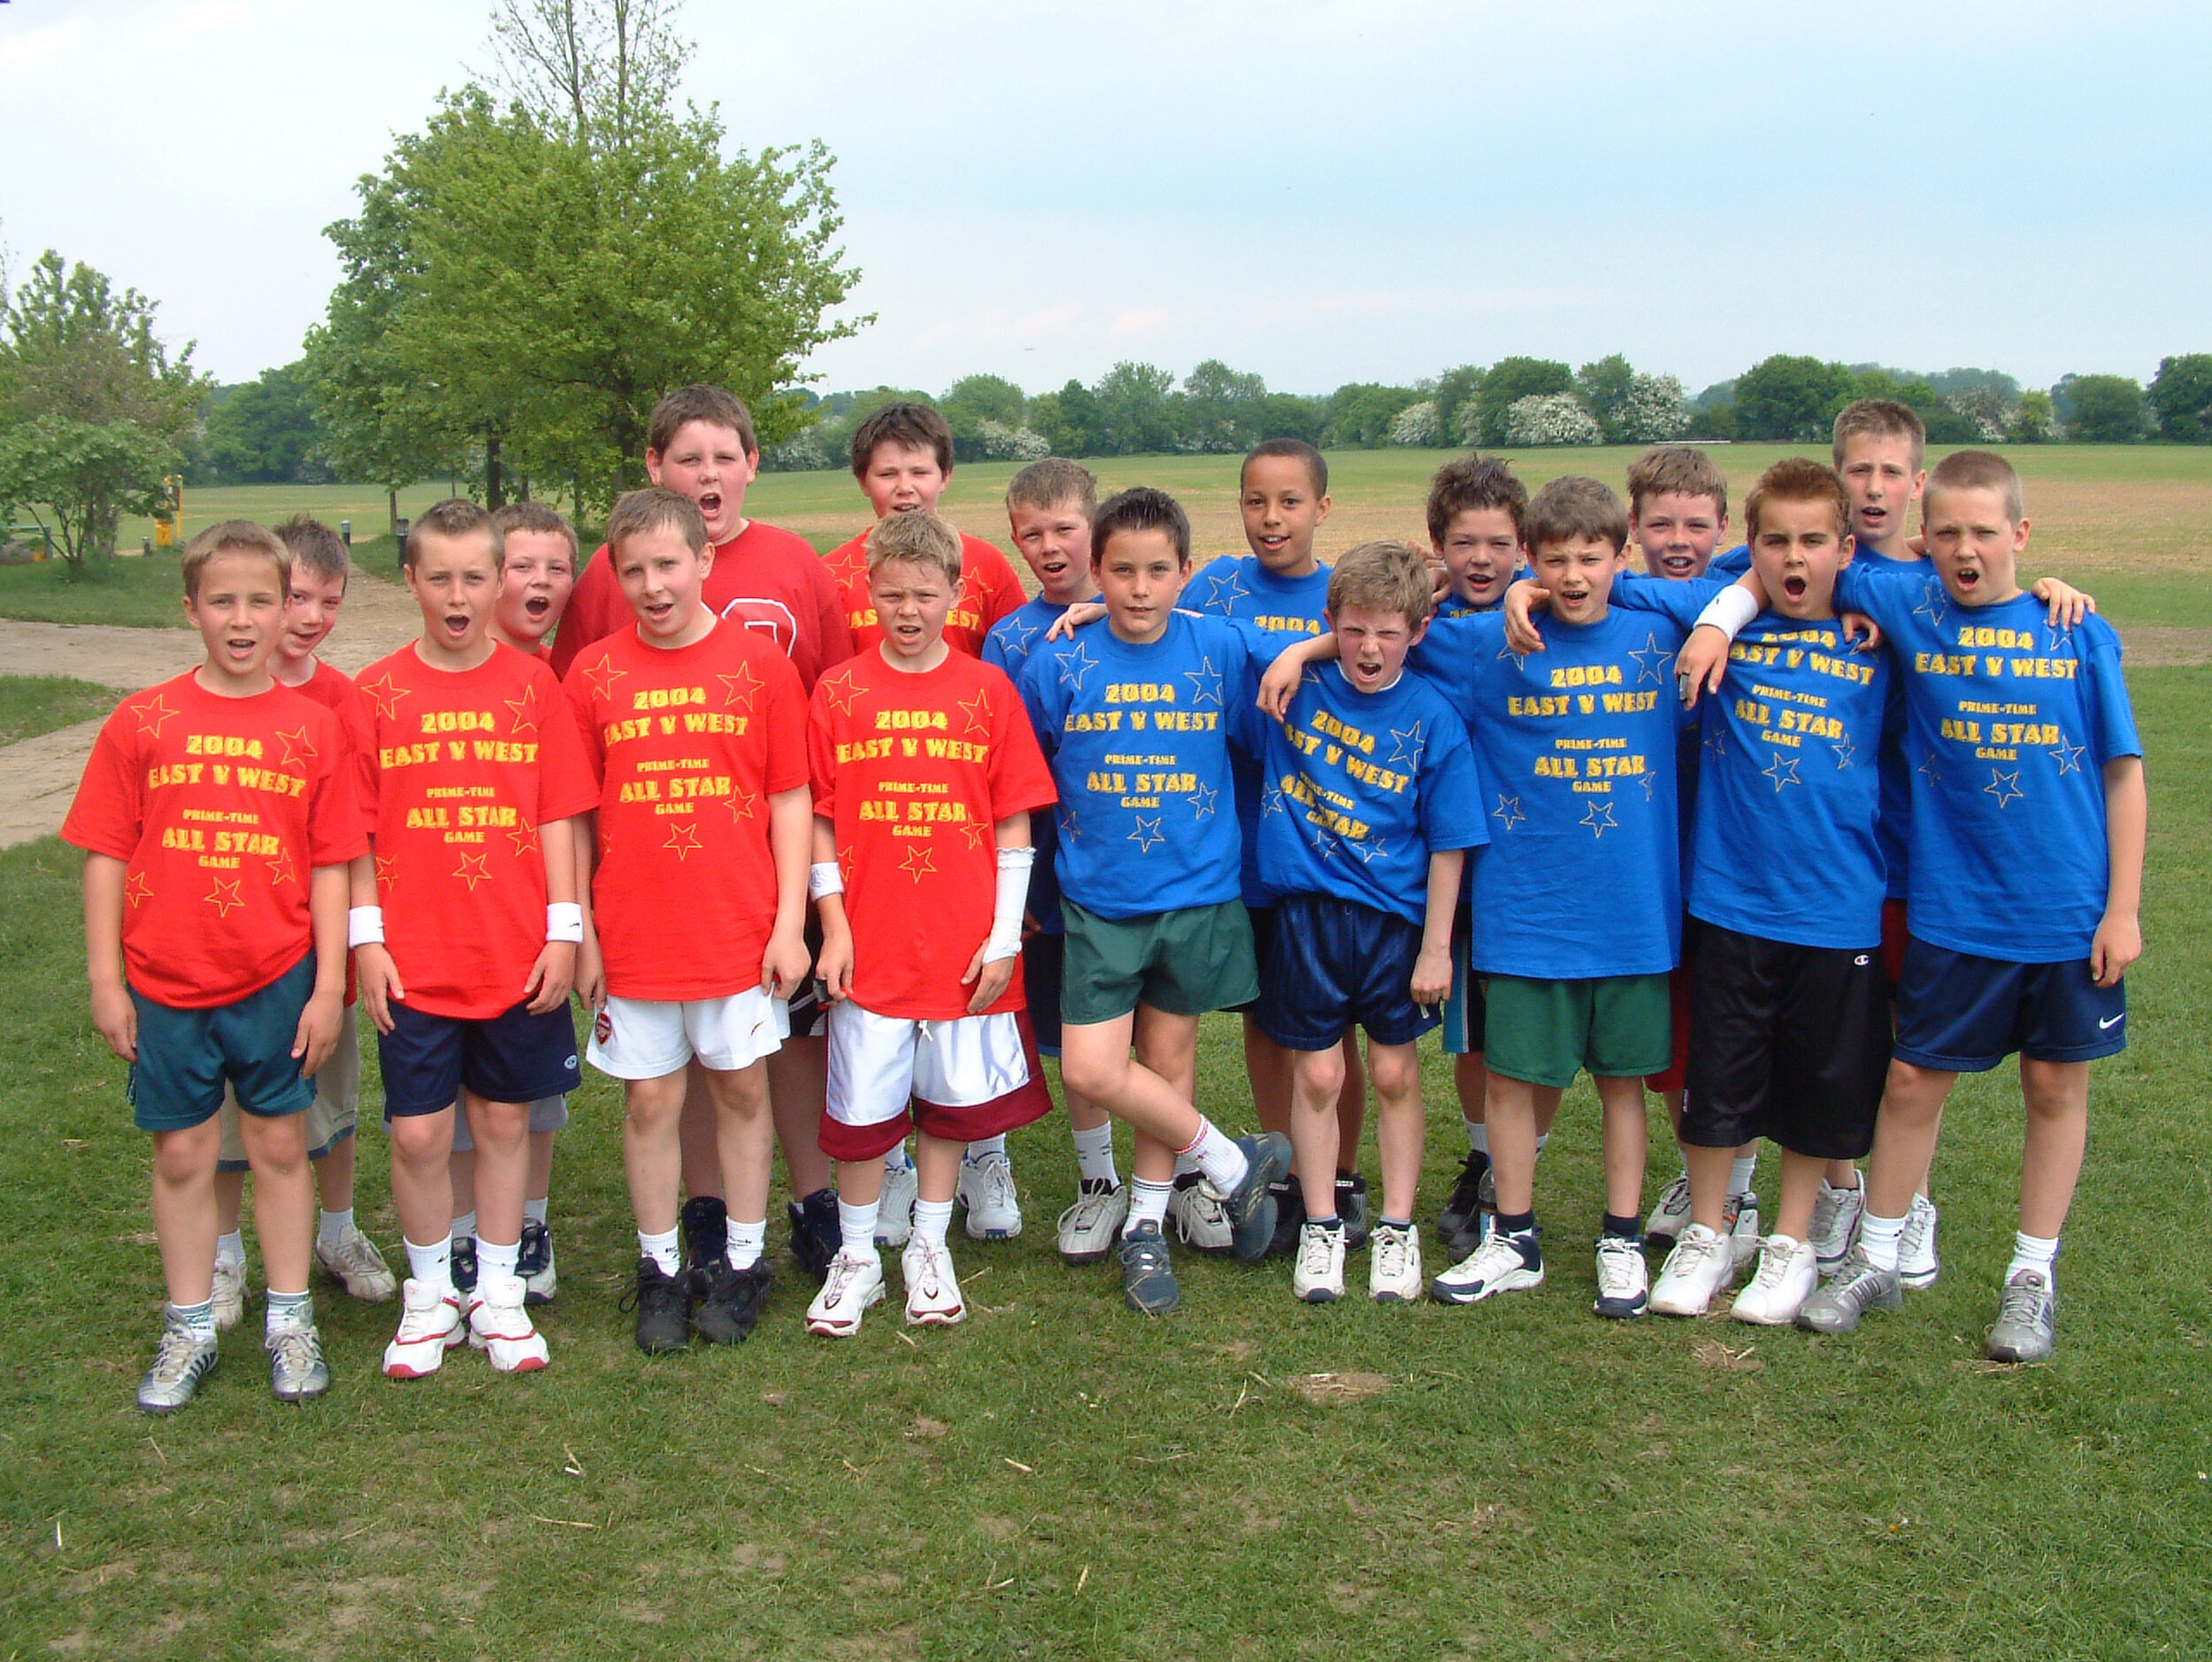 2004 YEAR 6 ALL STAR GAME